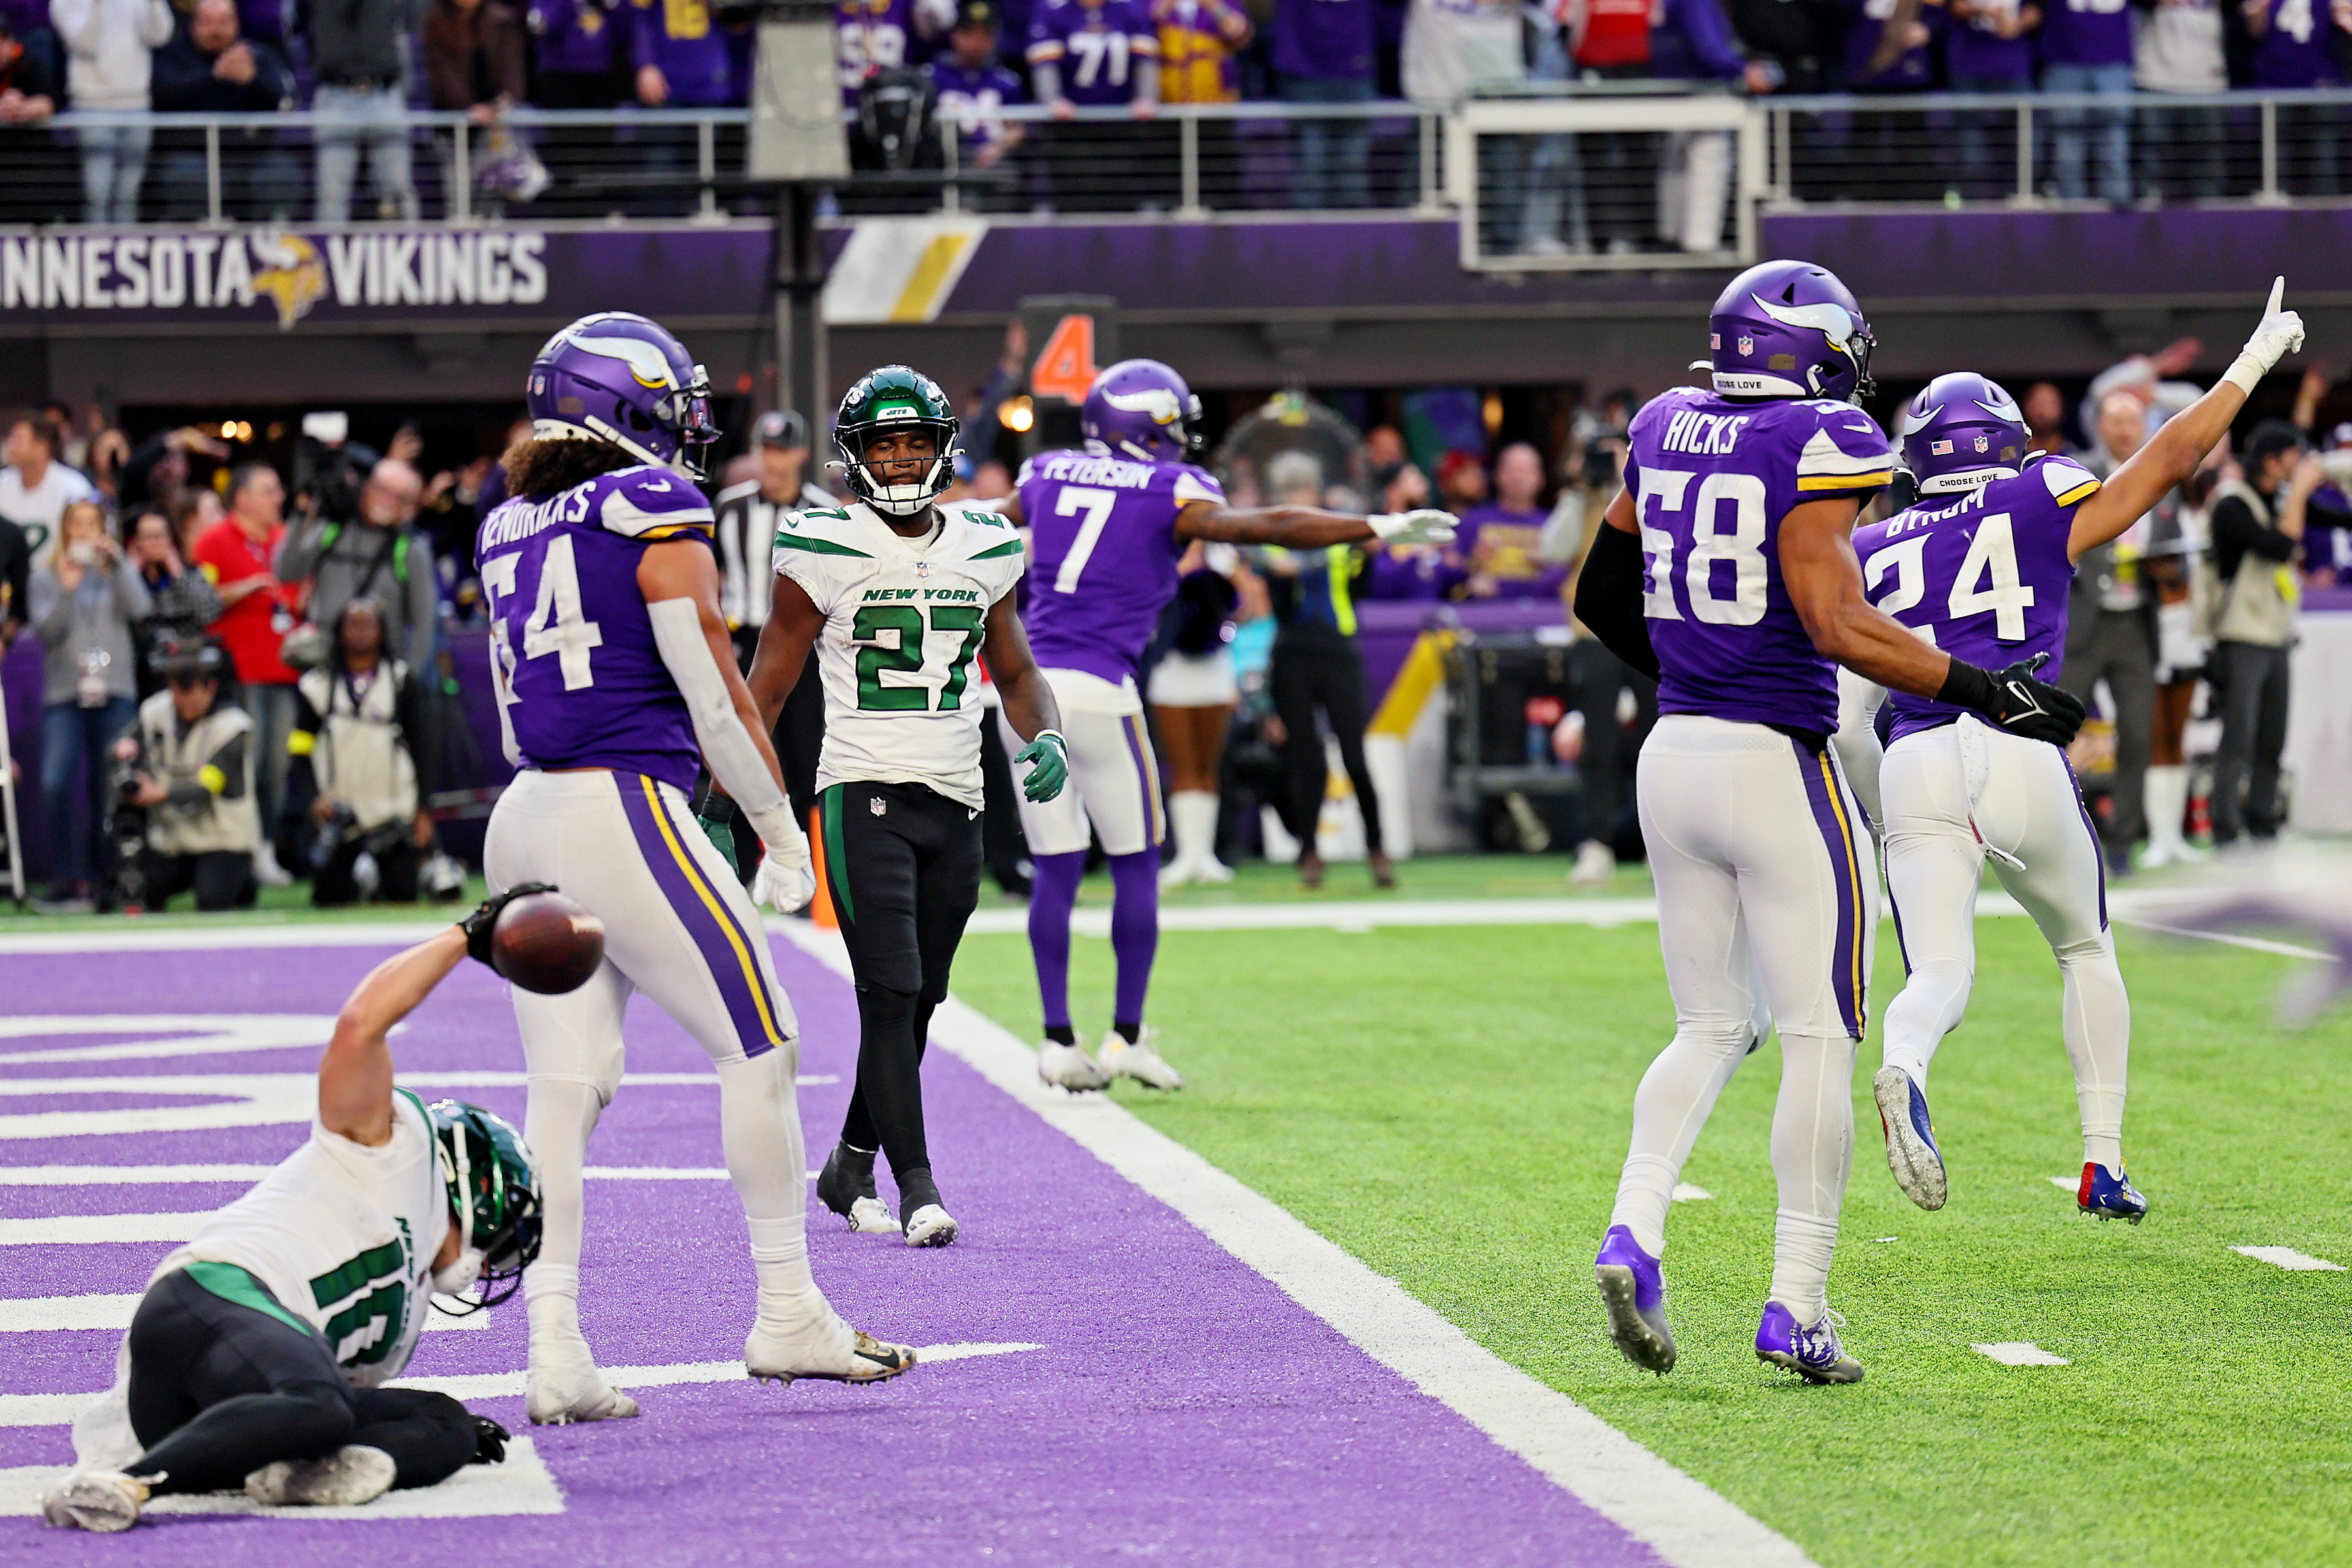 NY Jets lose a tough one to Vikings, 27-22